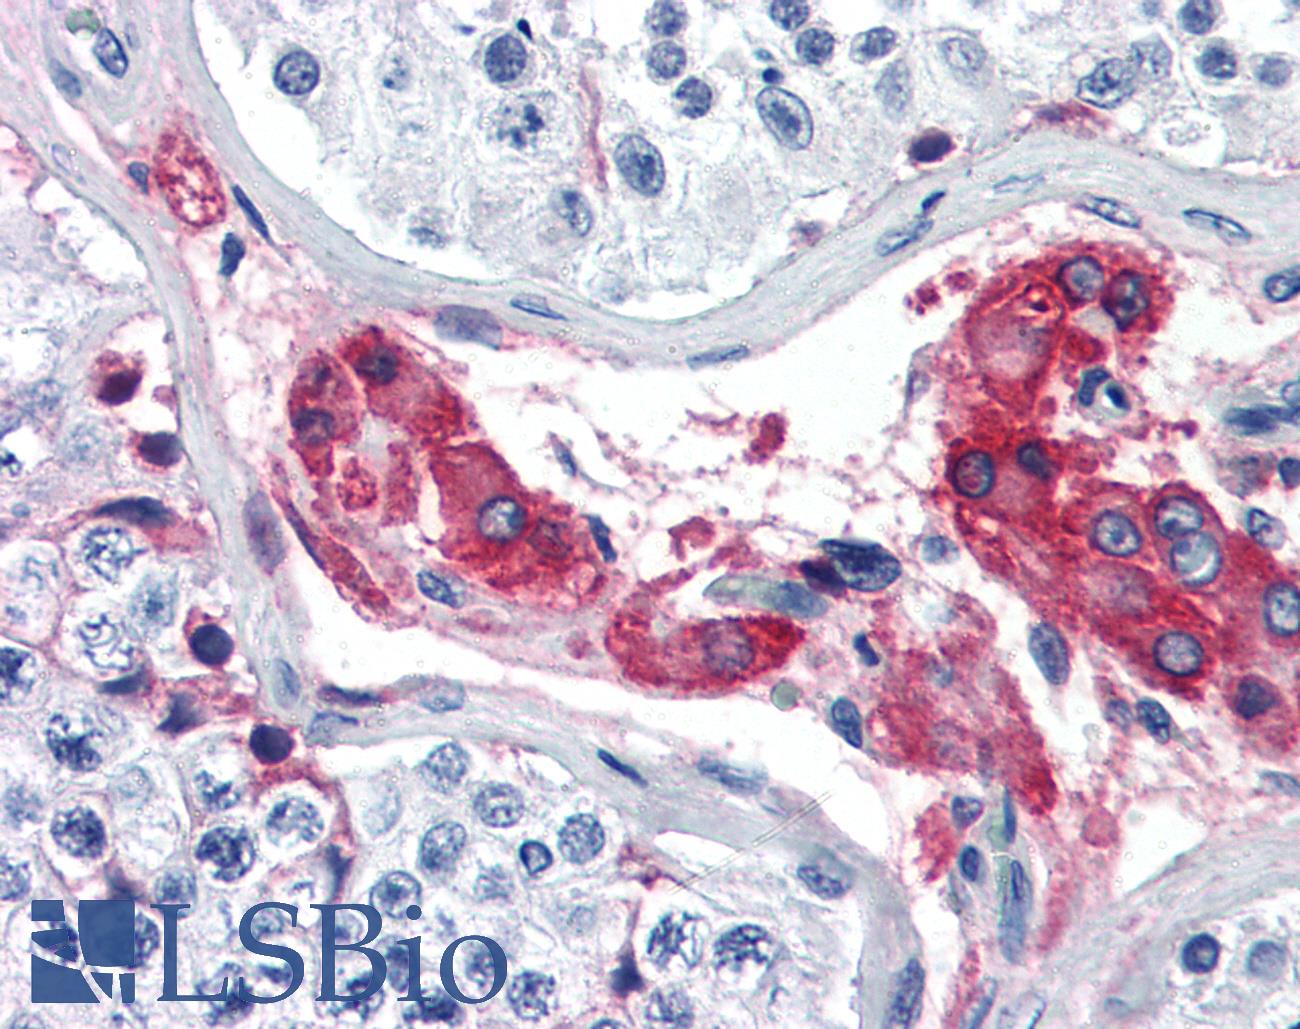 F12 / Factor XII Antibody - Anti-F12 / Factor XII antibody IHC of human testis. Immunohistochemistry of formalin-fixed, paraffin-embedded tissue after heat-induced antigen retrieval. Antibody concentration 5 ug/ml.